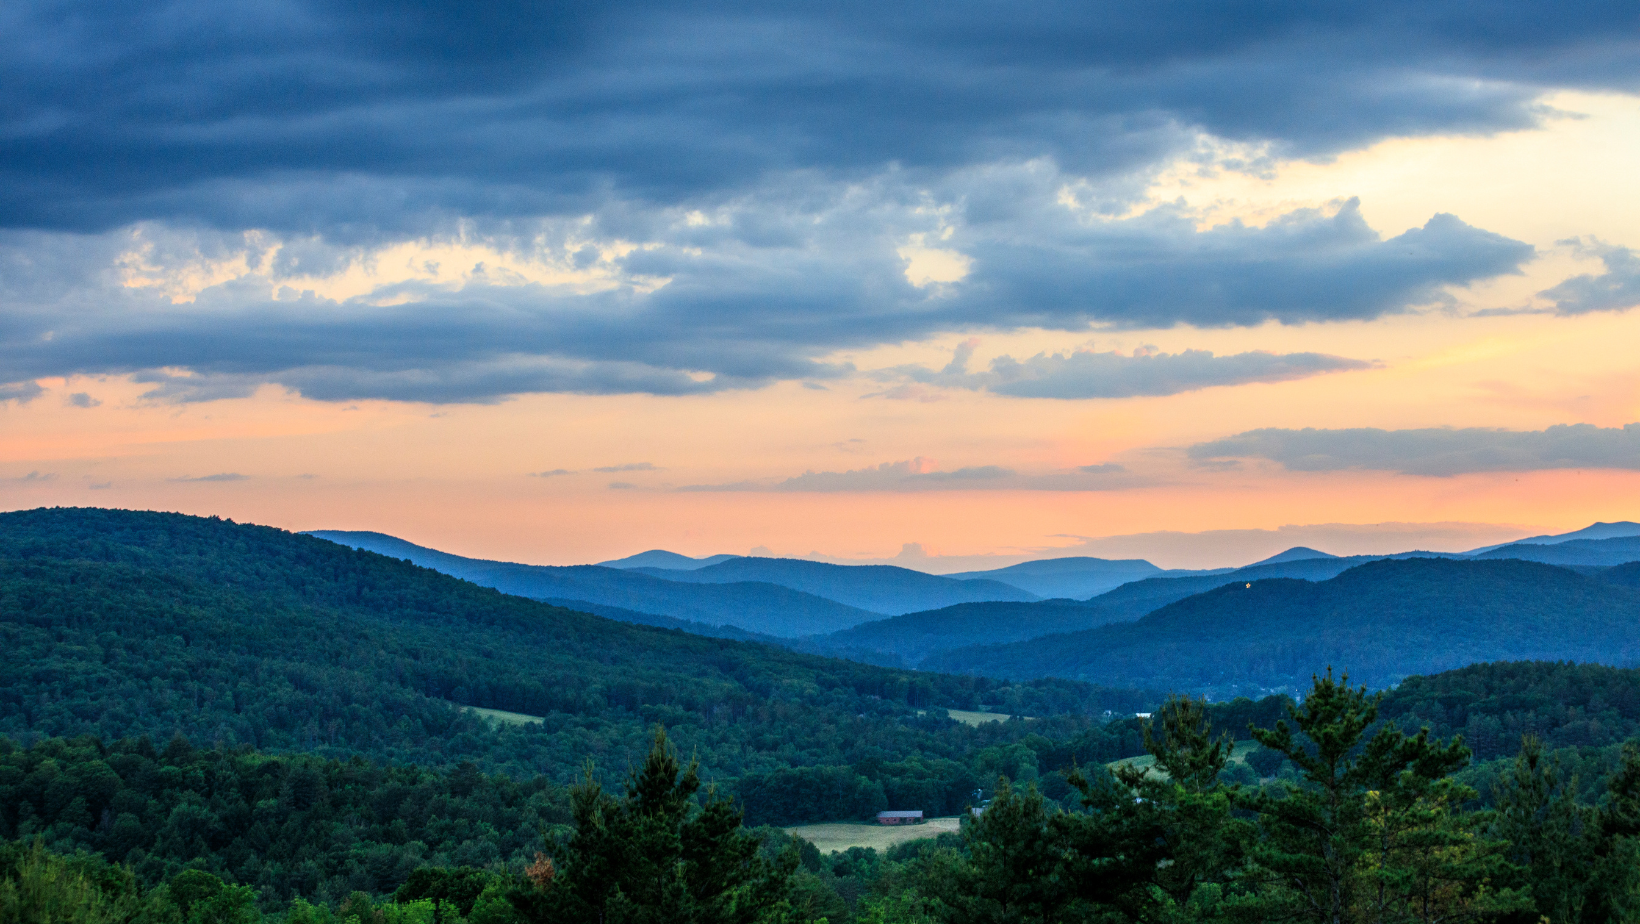 Sunset image of mountainous landscape in the Northeast Kingdom of Vermont